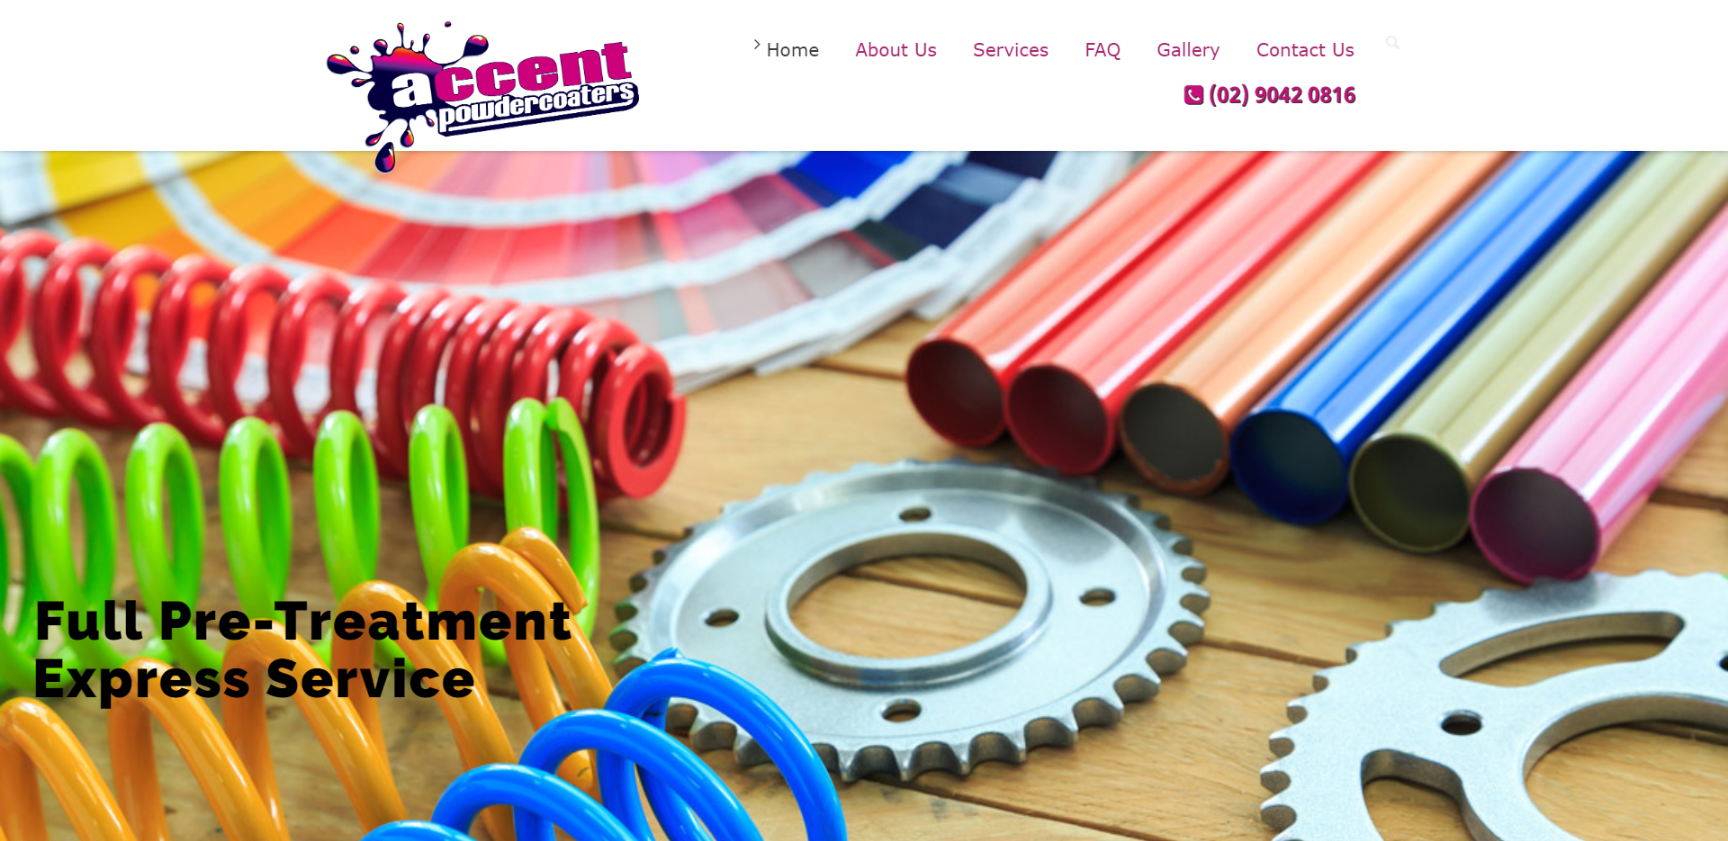 Read more about the article Accent Powder Coating